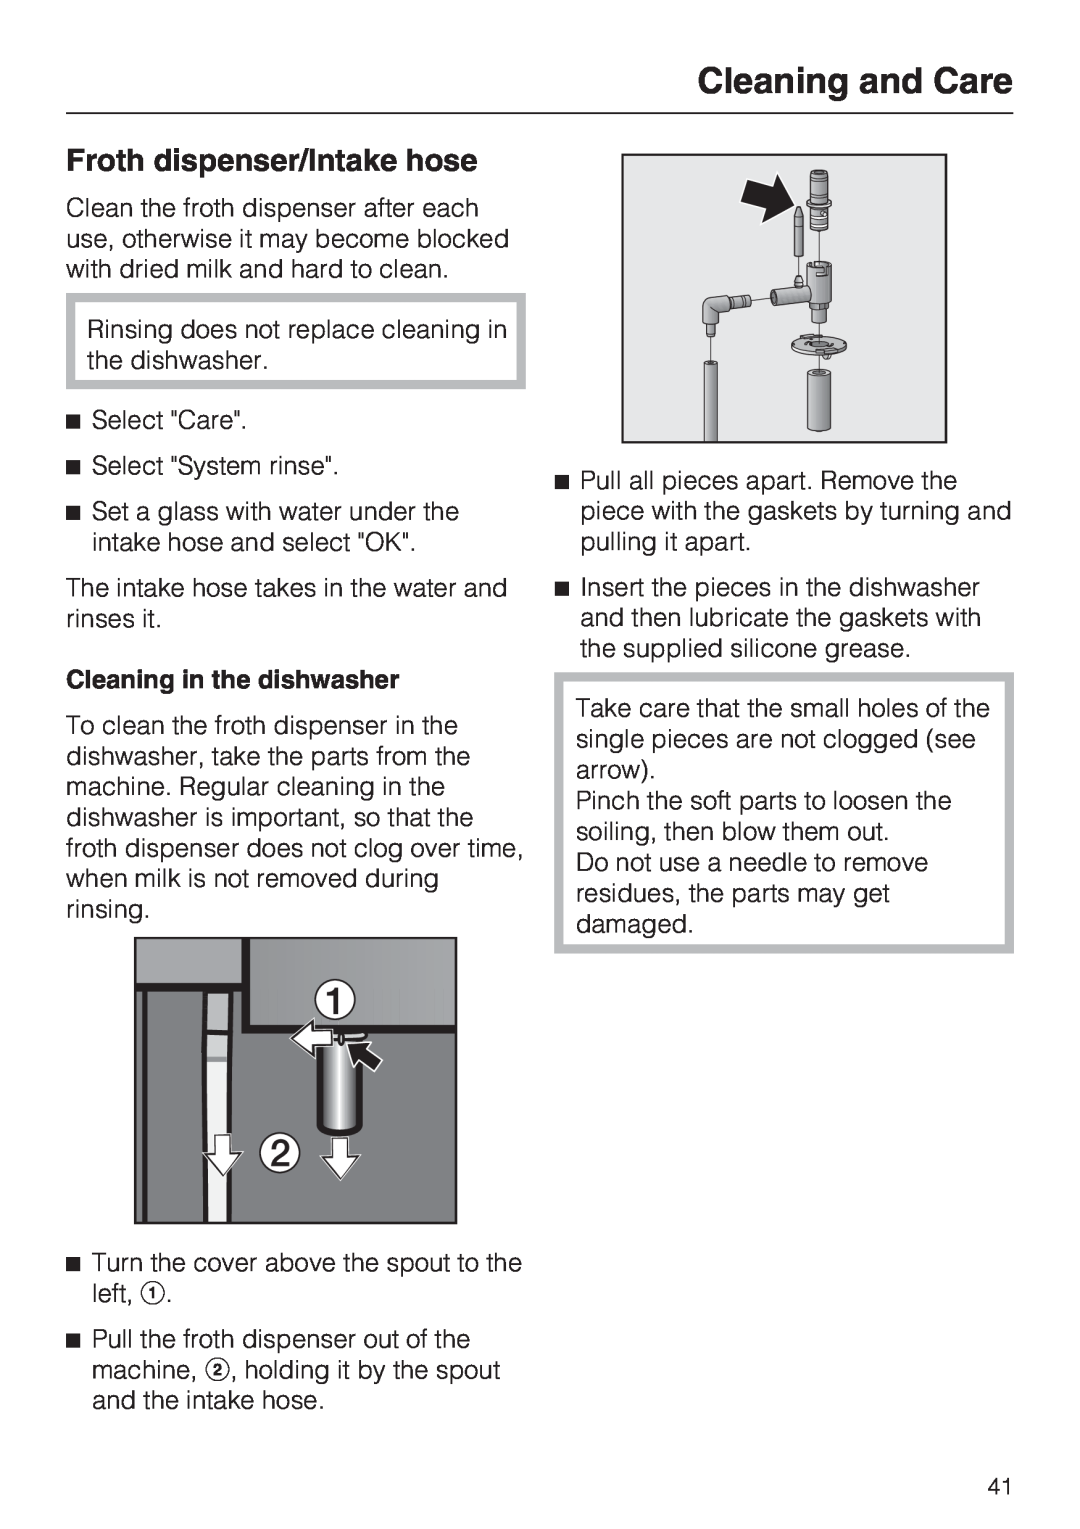 Miele CVA 4070 installation instructions Froth dispenser/Intake hose, Cleaning in the dishwasher, Cleaning and Care 